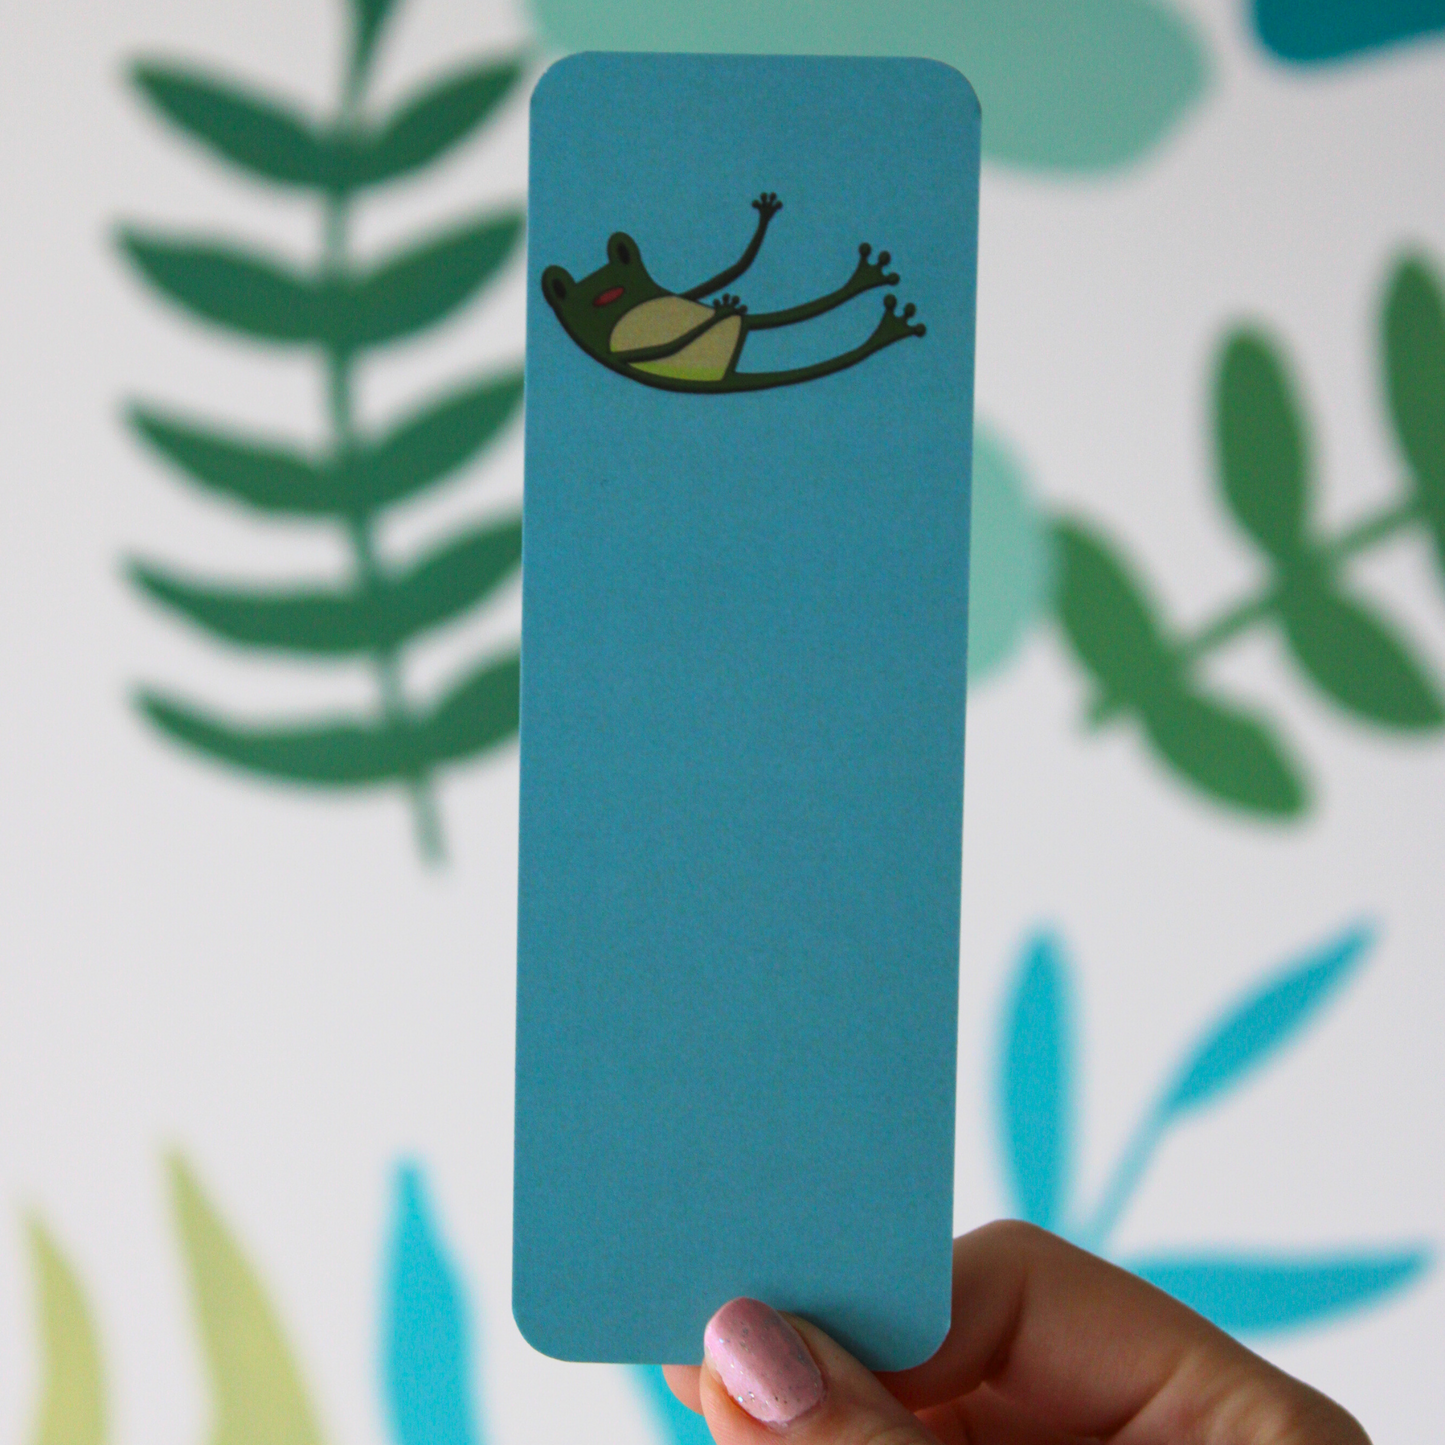 A hand holding a blue bookmark with a cartoon frog falling. The background is a blurred leaf pattern.